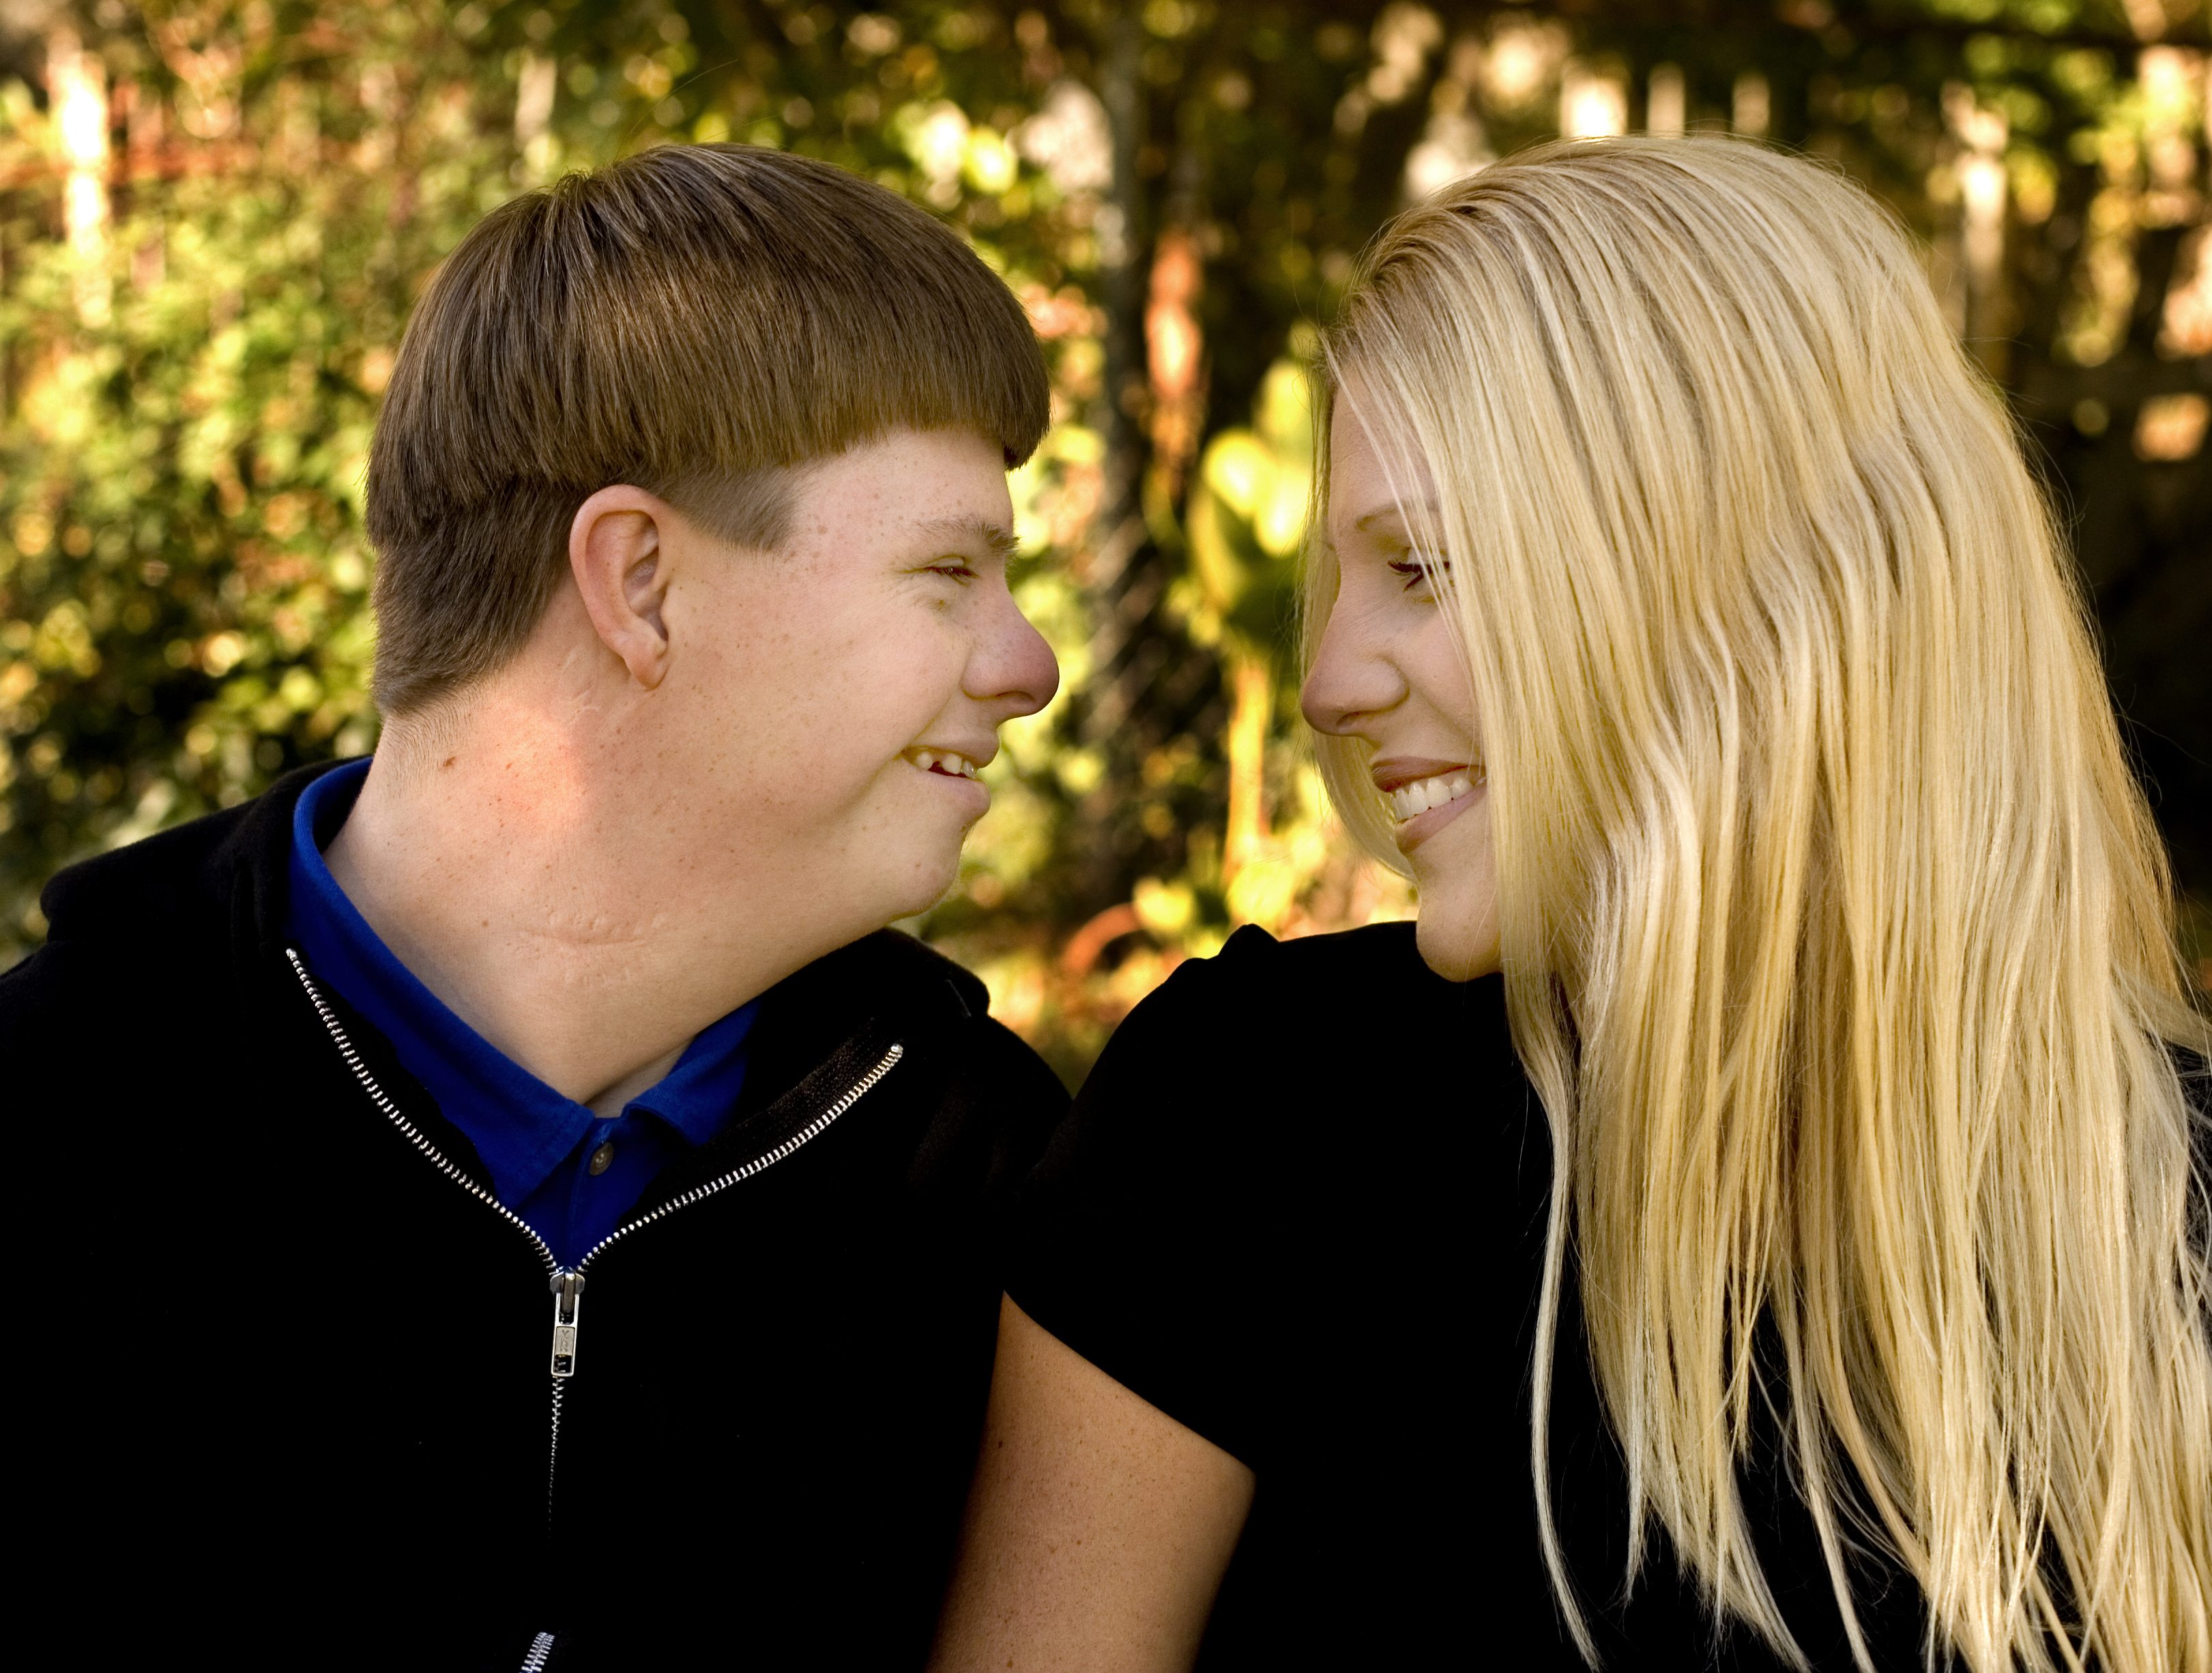 Researchers are inviting siblings (ages 18-30) across the state to participate in a short survey titled "Strengths and Social Connections of Siblings with and without Developmental Disabilities." 